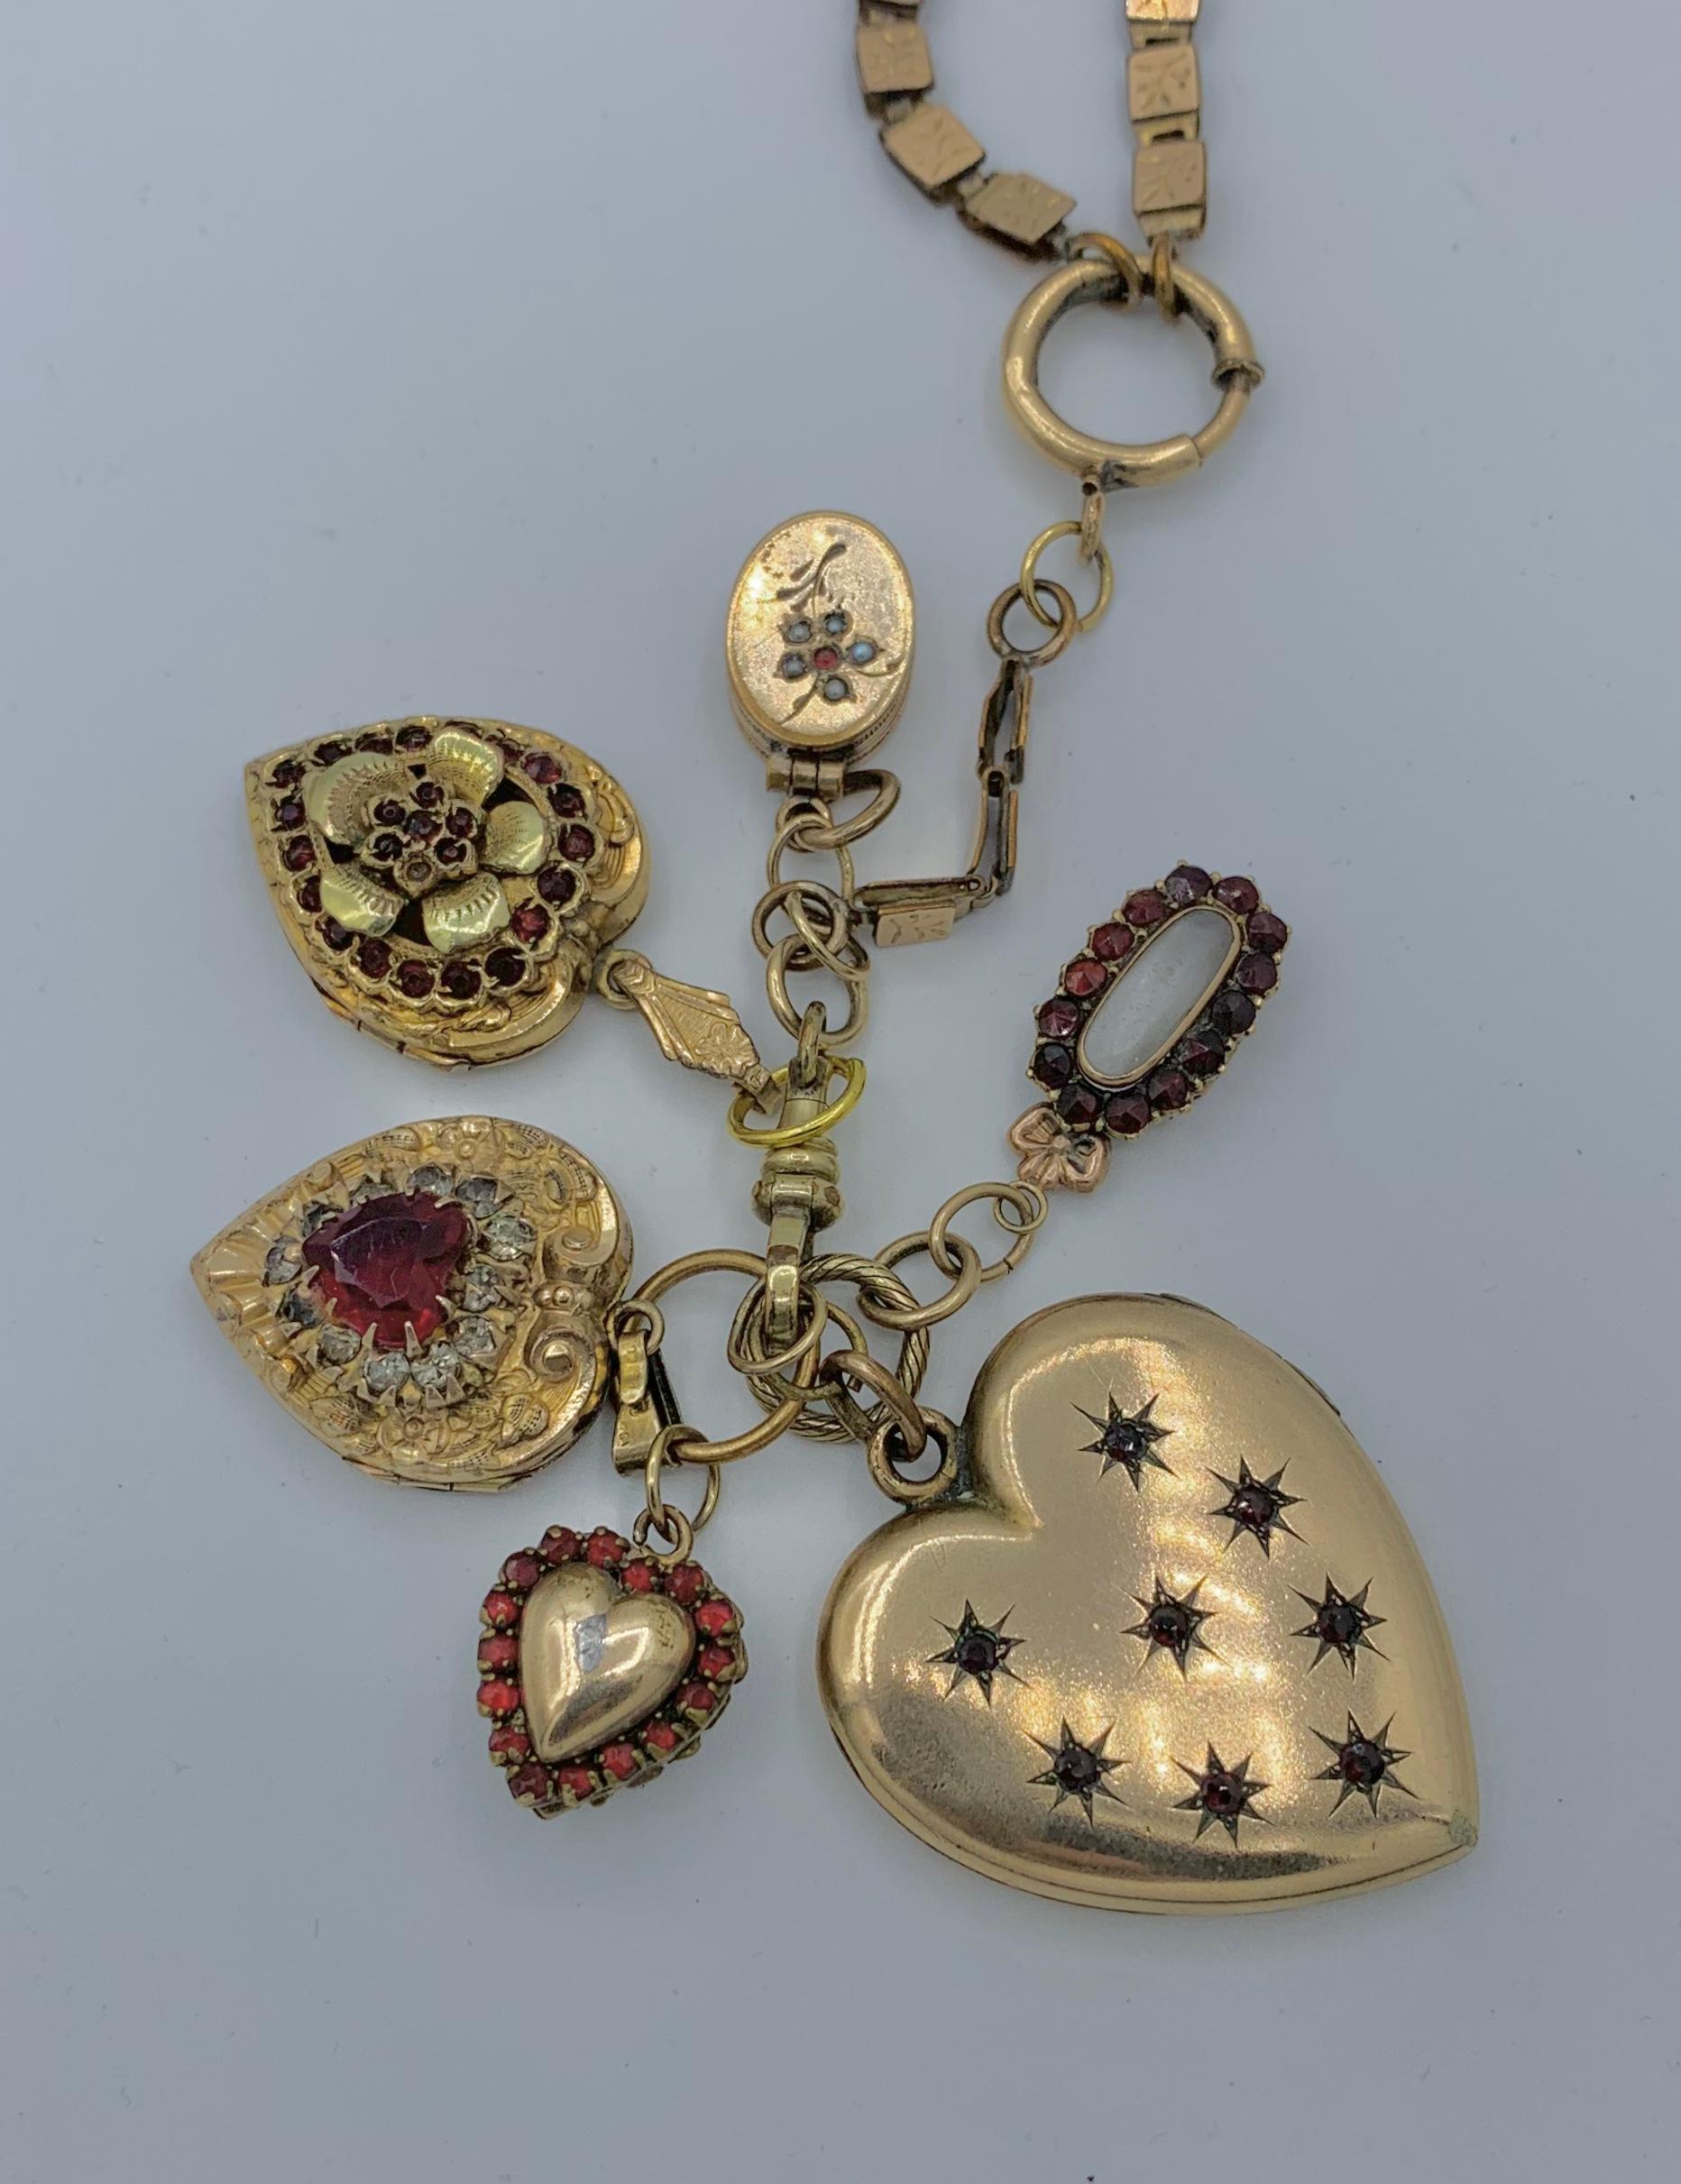 This is just a stunning Victorian Belle Epoque Necklace with 6 antique Picture Locket Charms each set with red Bohemian Garnets in Heart shape and oval motifs.  The lockets and the necklace are gold filled.  The lockets all hang from a large jump